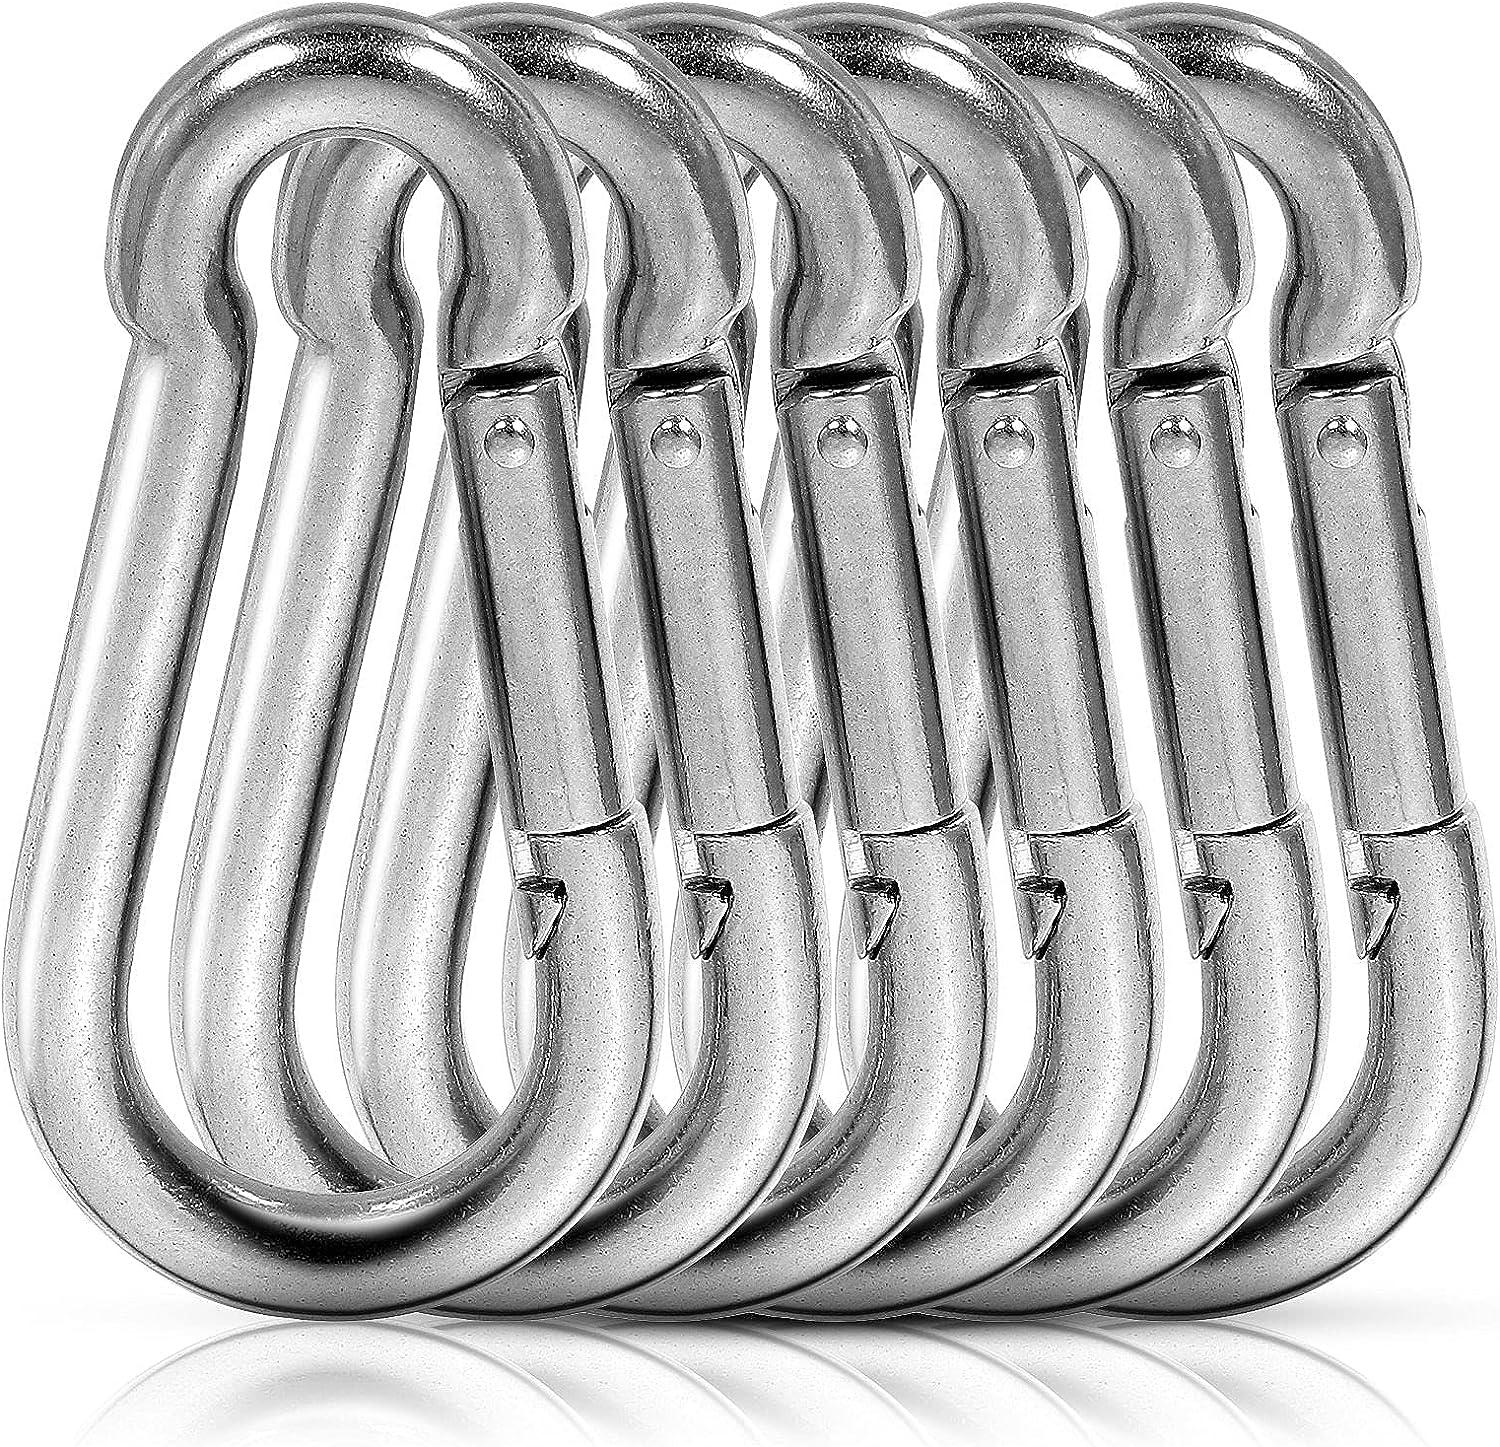 LANIAKEA 12Pcs 4inch Spring Snap Hook, M10 Stainless Steel Quick Links, 3/8  inch Large Carabiner Clips Heavy Duty for Camping, Swing, Hammock, Hiking,  Fishing, Gym, 770LBS